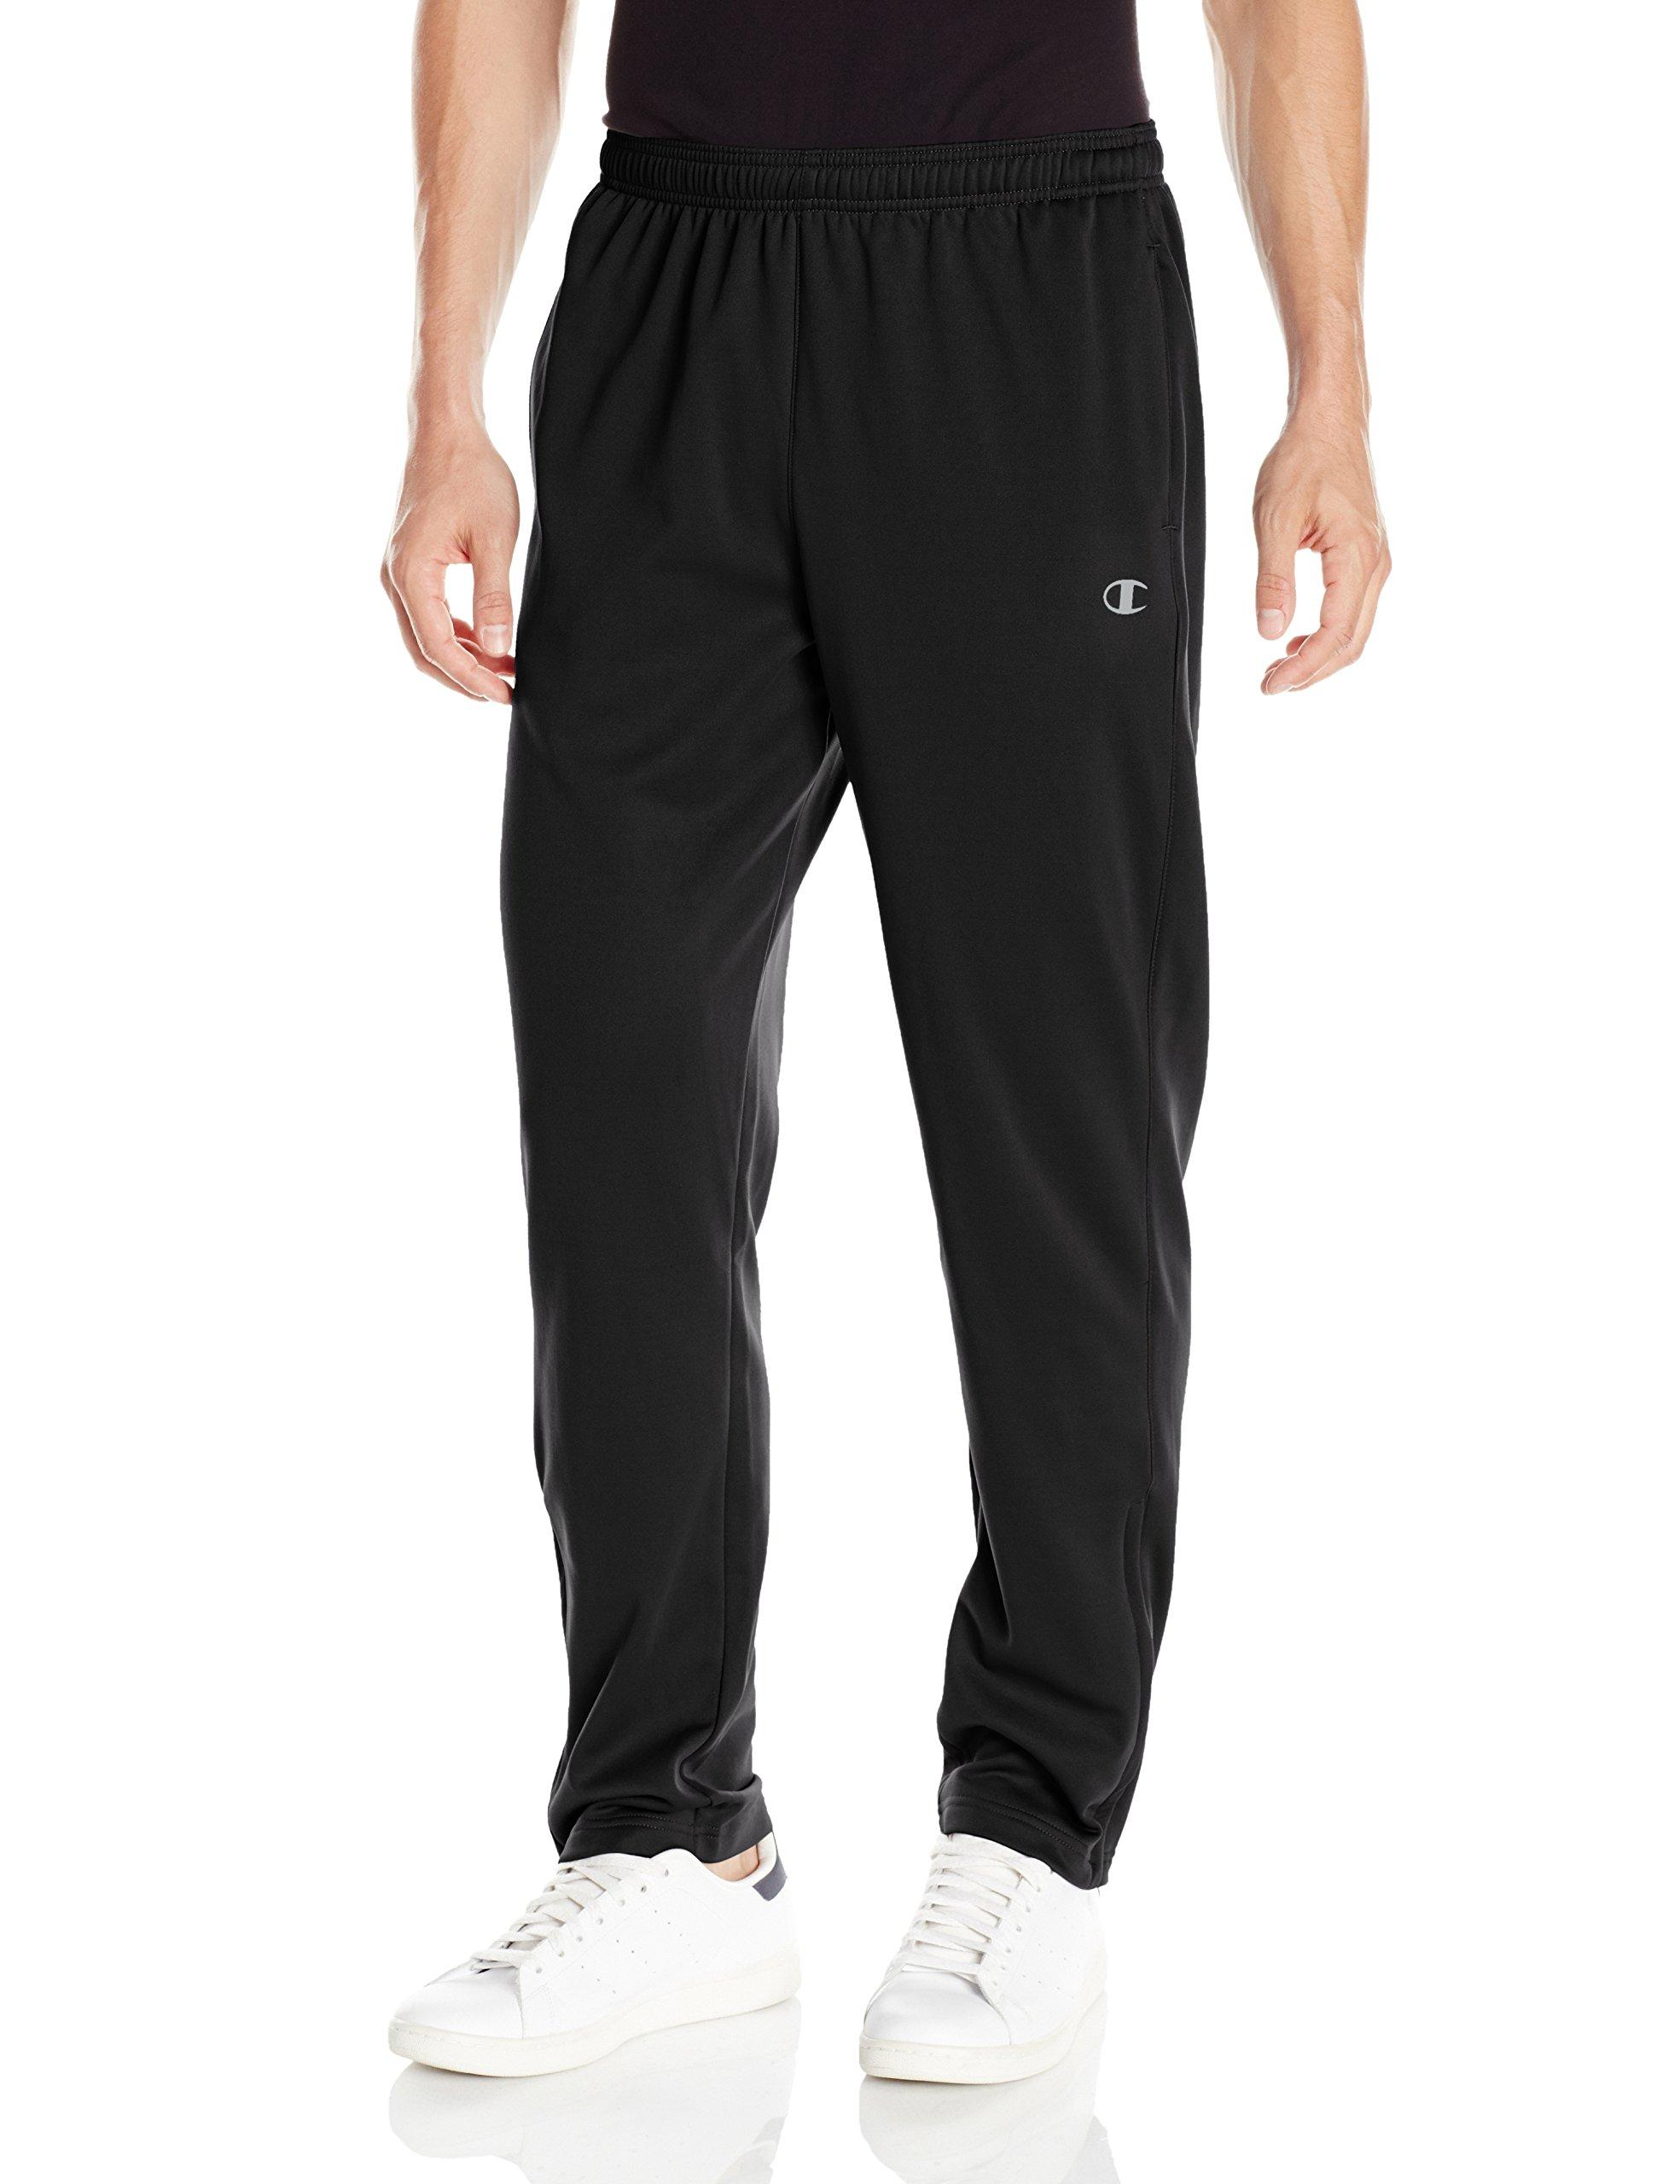 Champion Performance Fleece Pant in Black for Men - Save 24% - Lyst